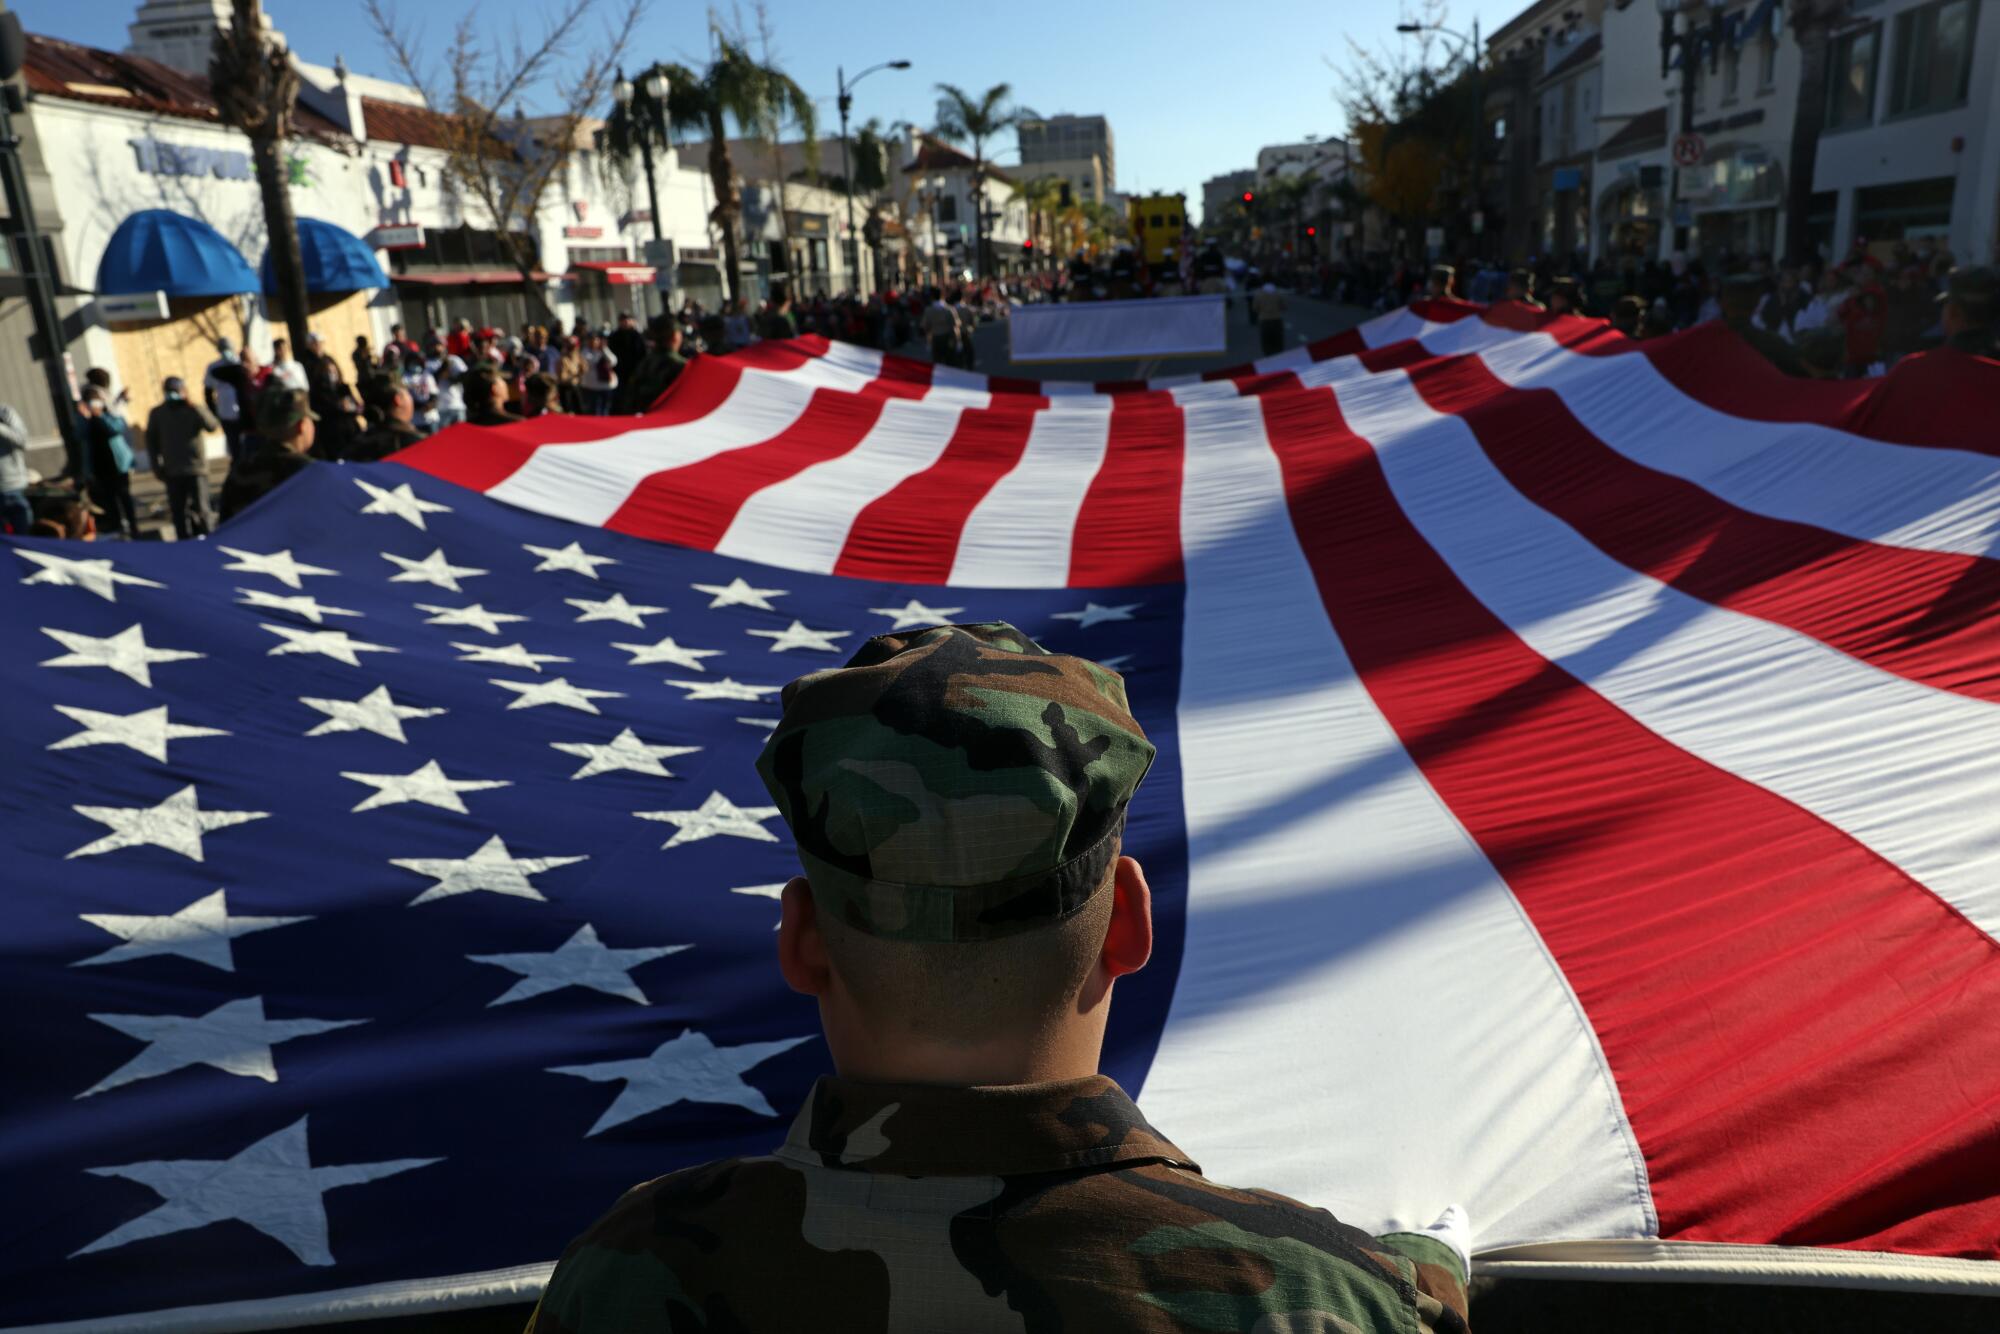 People in military fatigues carry a huge U.S. flag.